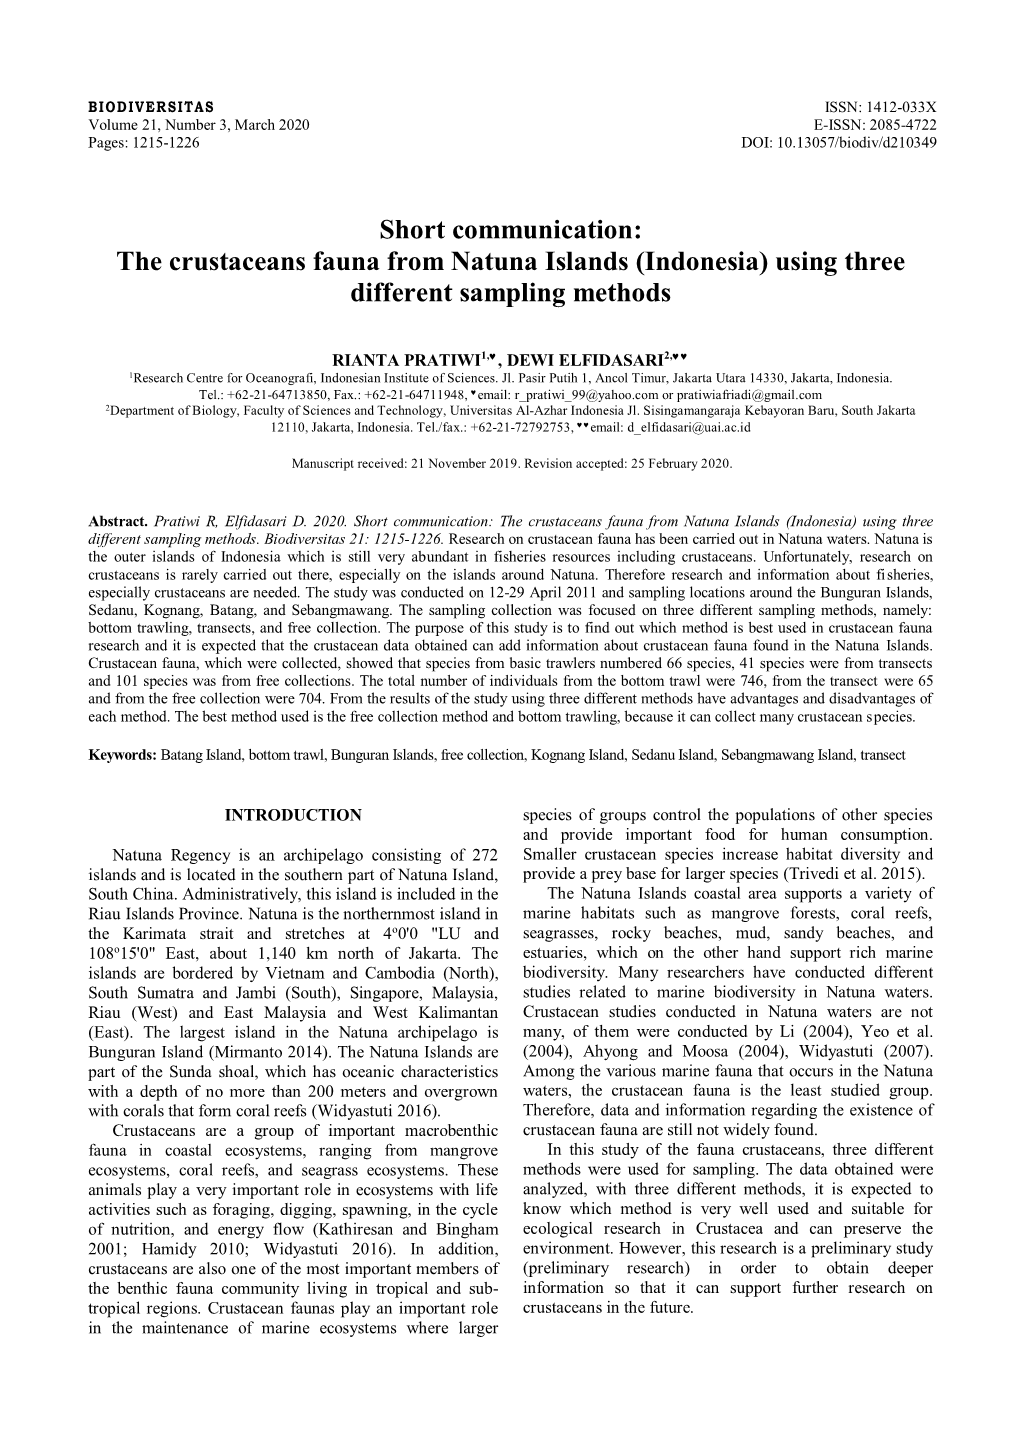 The Crustaceans Fauna from Natuna Islands (Indonesia) Using Three Different Sampling Methods